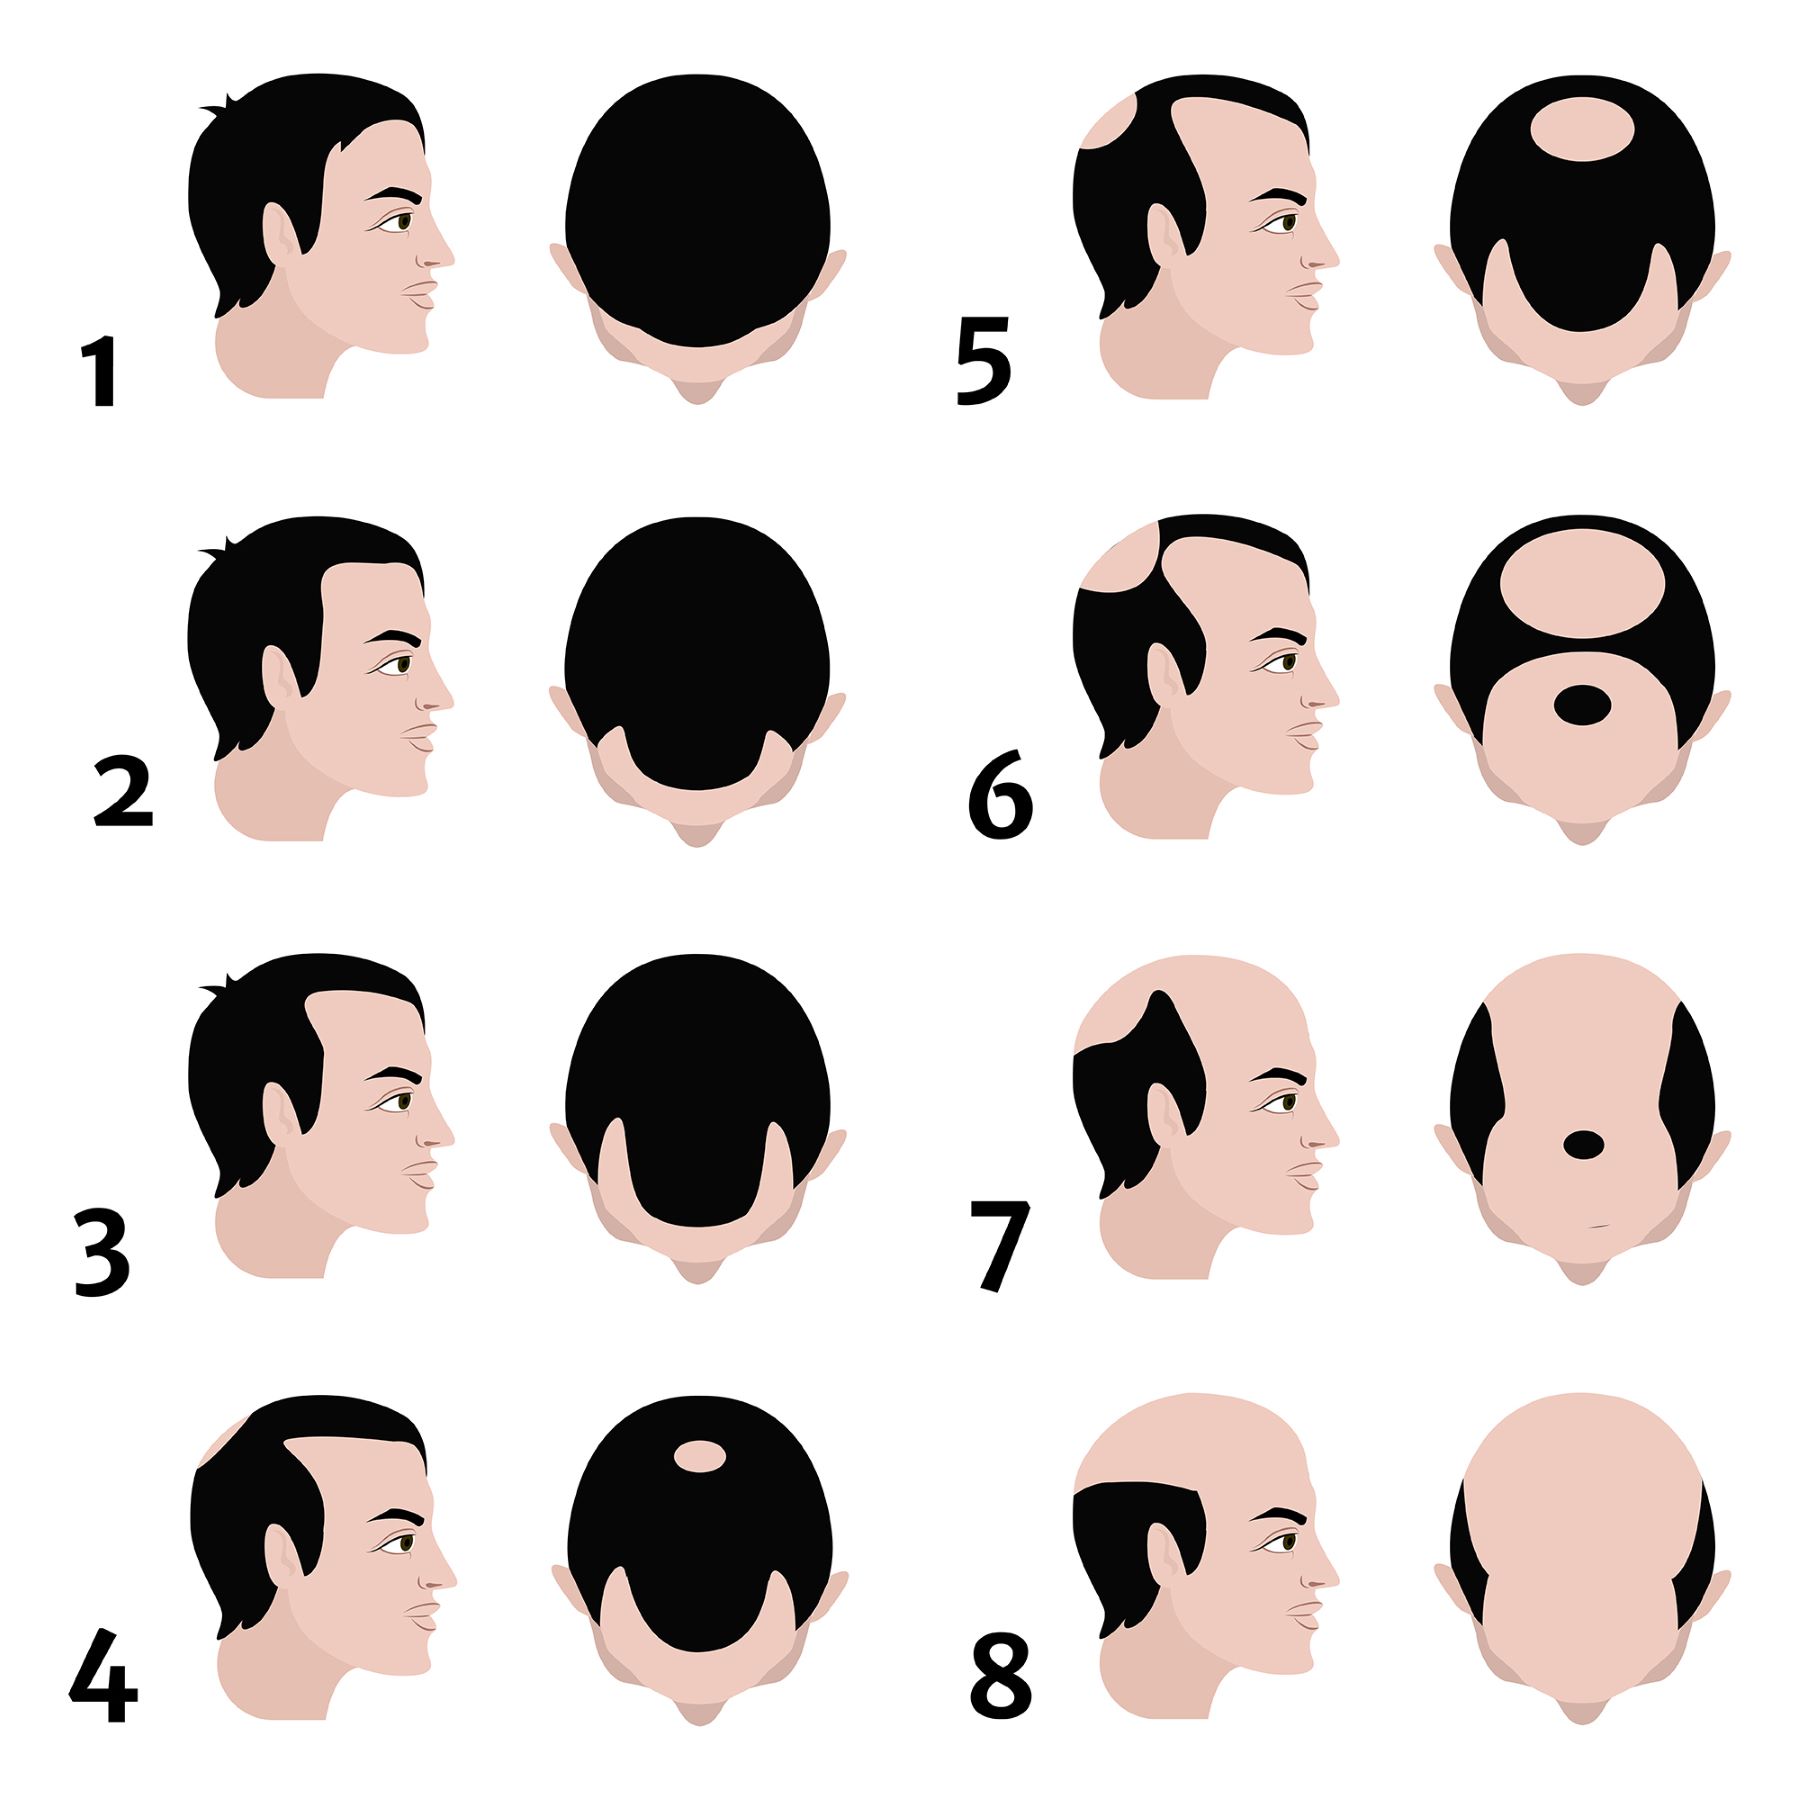 The Norwood Scale for male pattern baldness